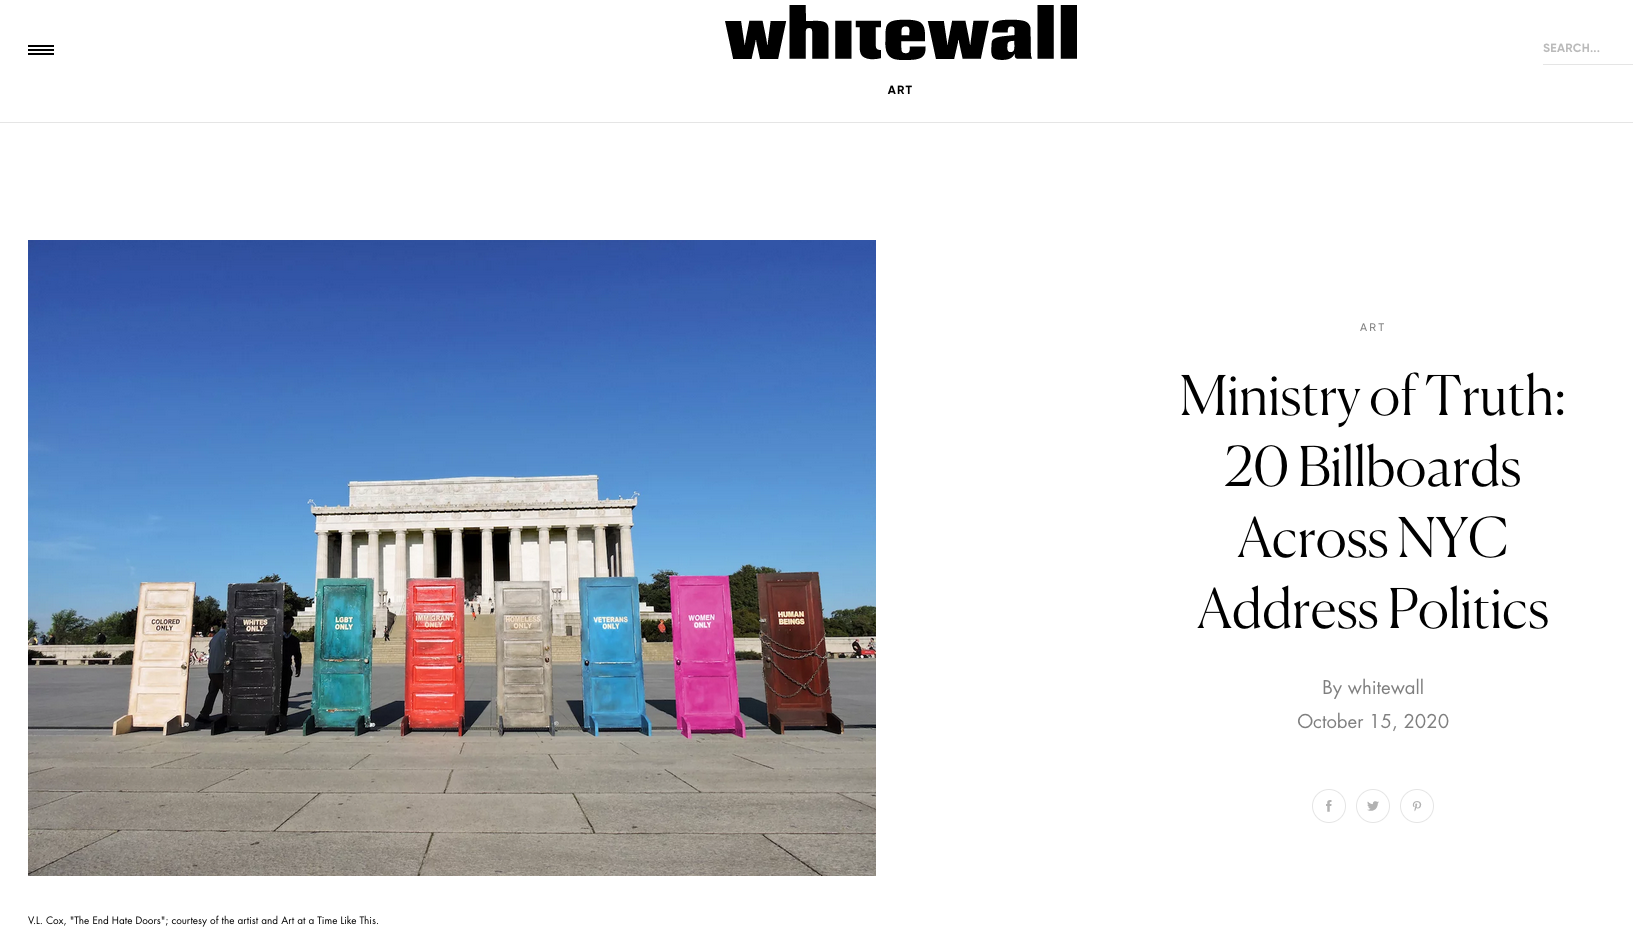 Ministry of Truth: 20 Billboards Across NYC Address Politics - WHITEWALL 2020